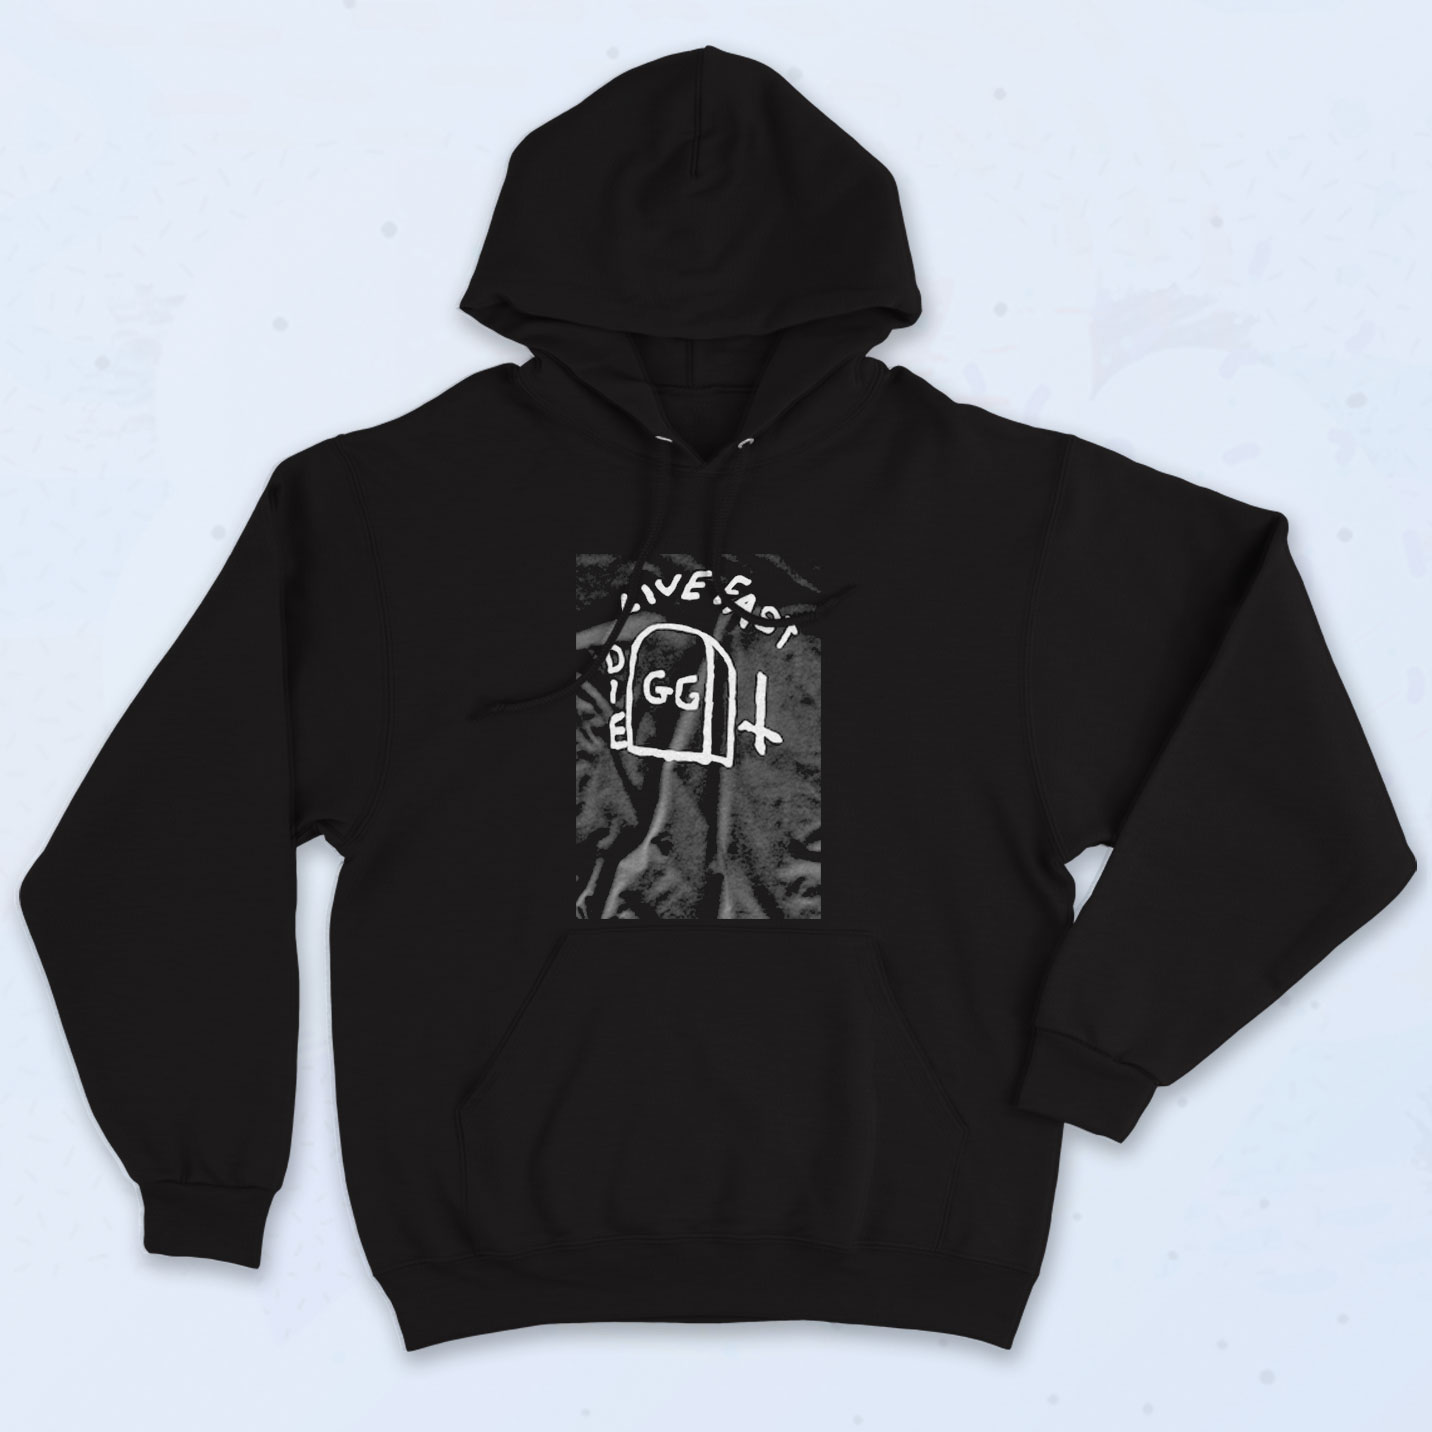 Tombstone Punk Live Fast Die Aesthetic Hoodie - 90sclothes.com